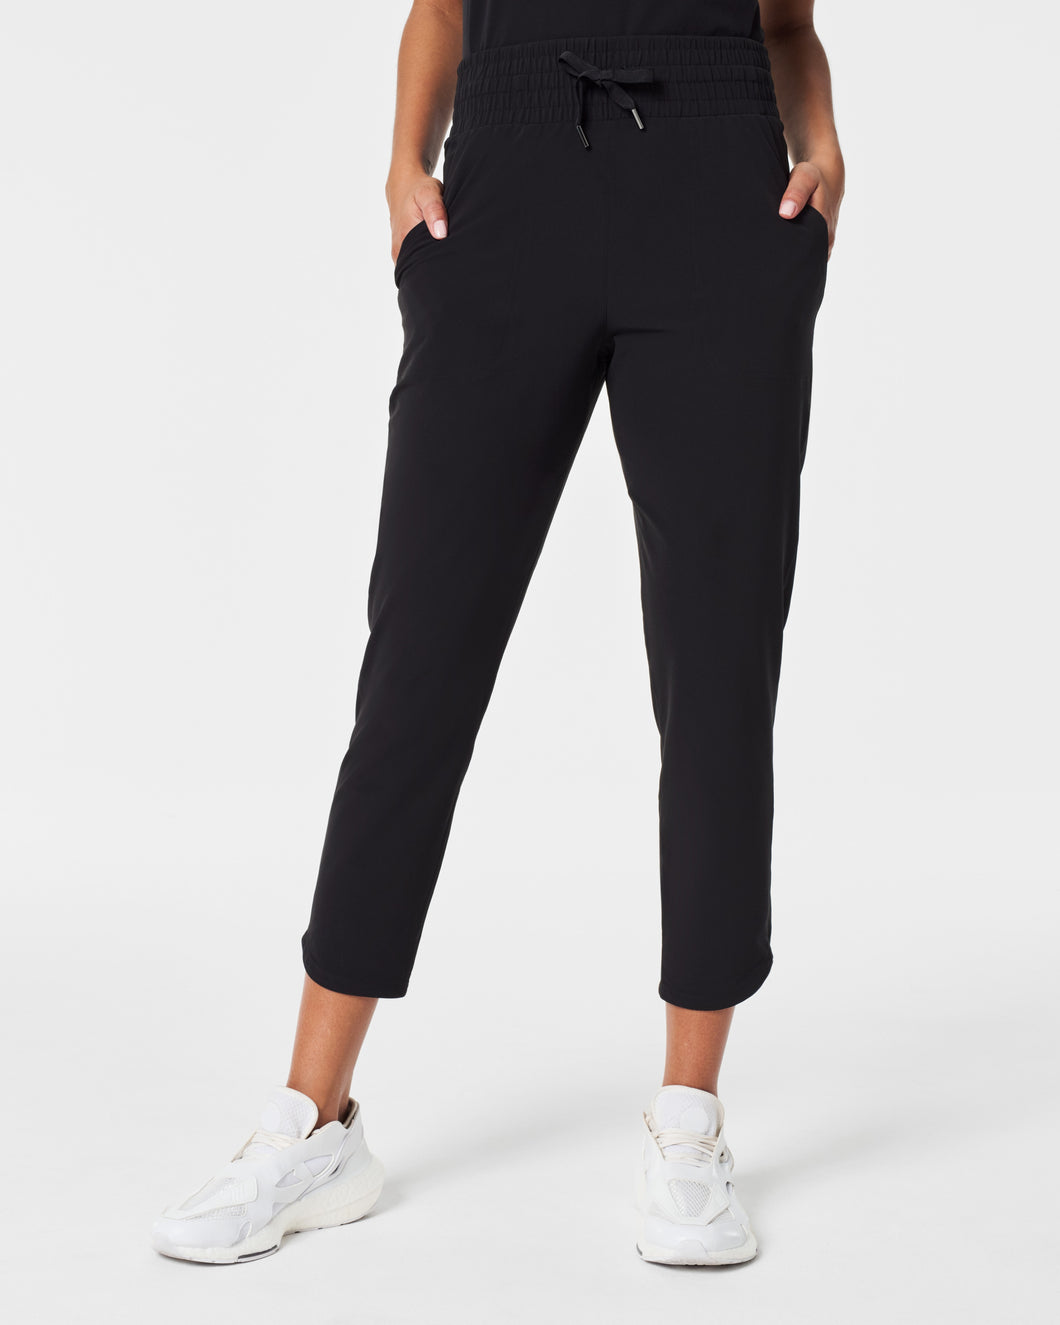 Spanx Casual Fridays Tapered Pant